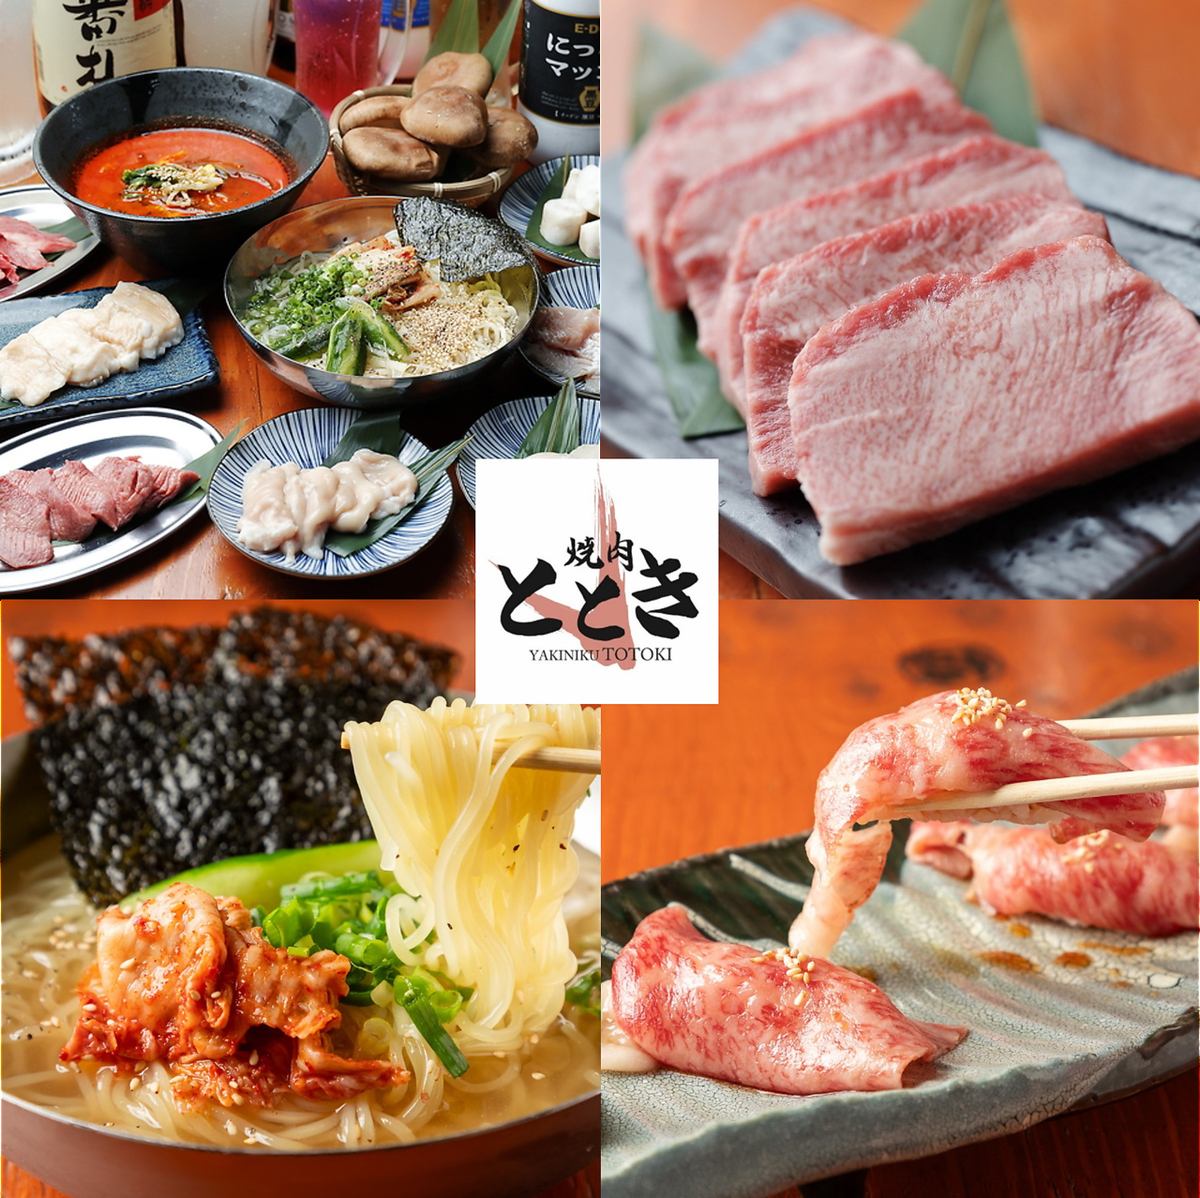 Authentic Yakiniku "Totoki" has been opened by the owner who trained at a famous restaurant★We will welcome you with lots of energy!